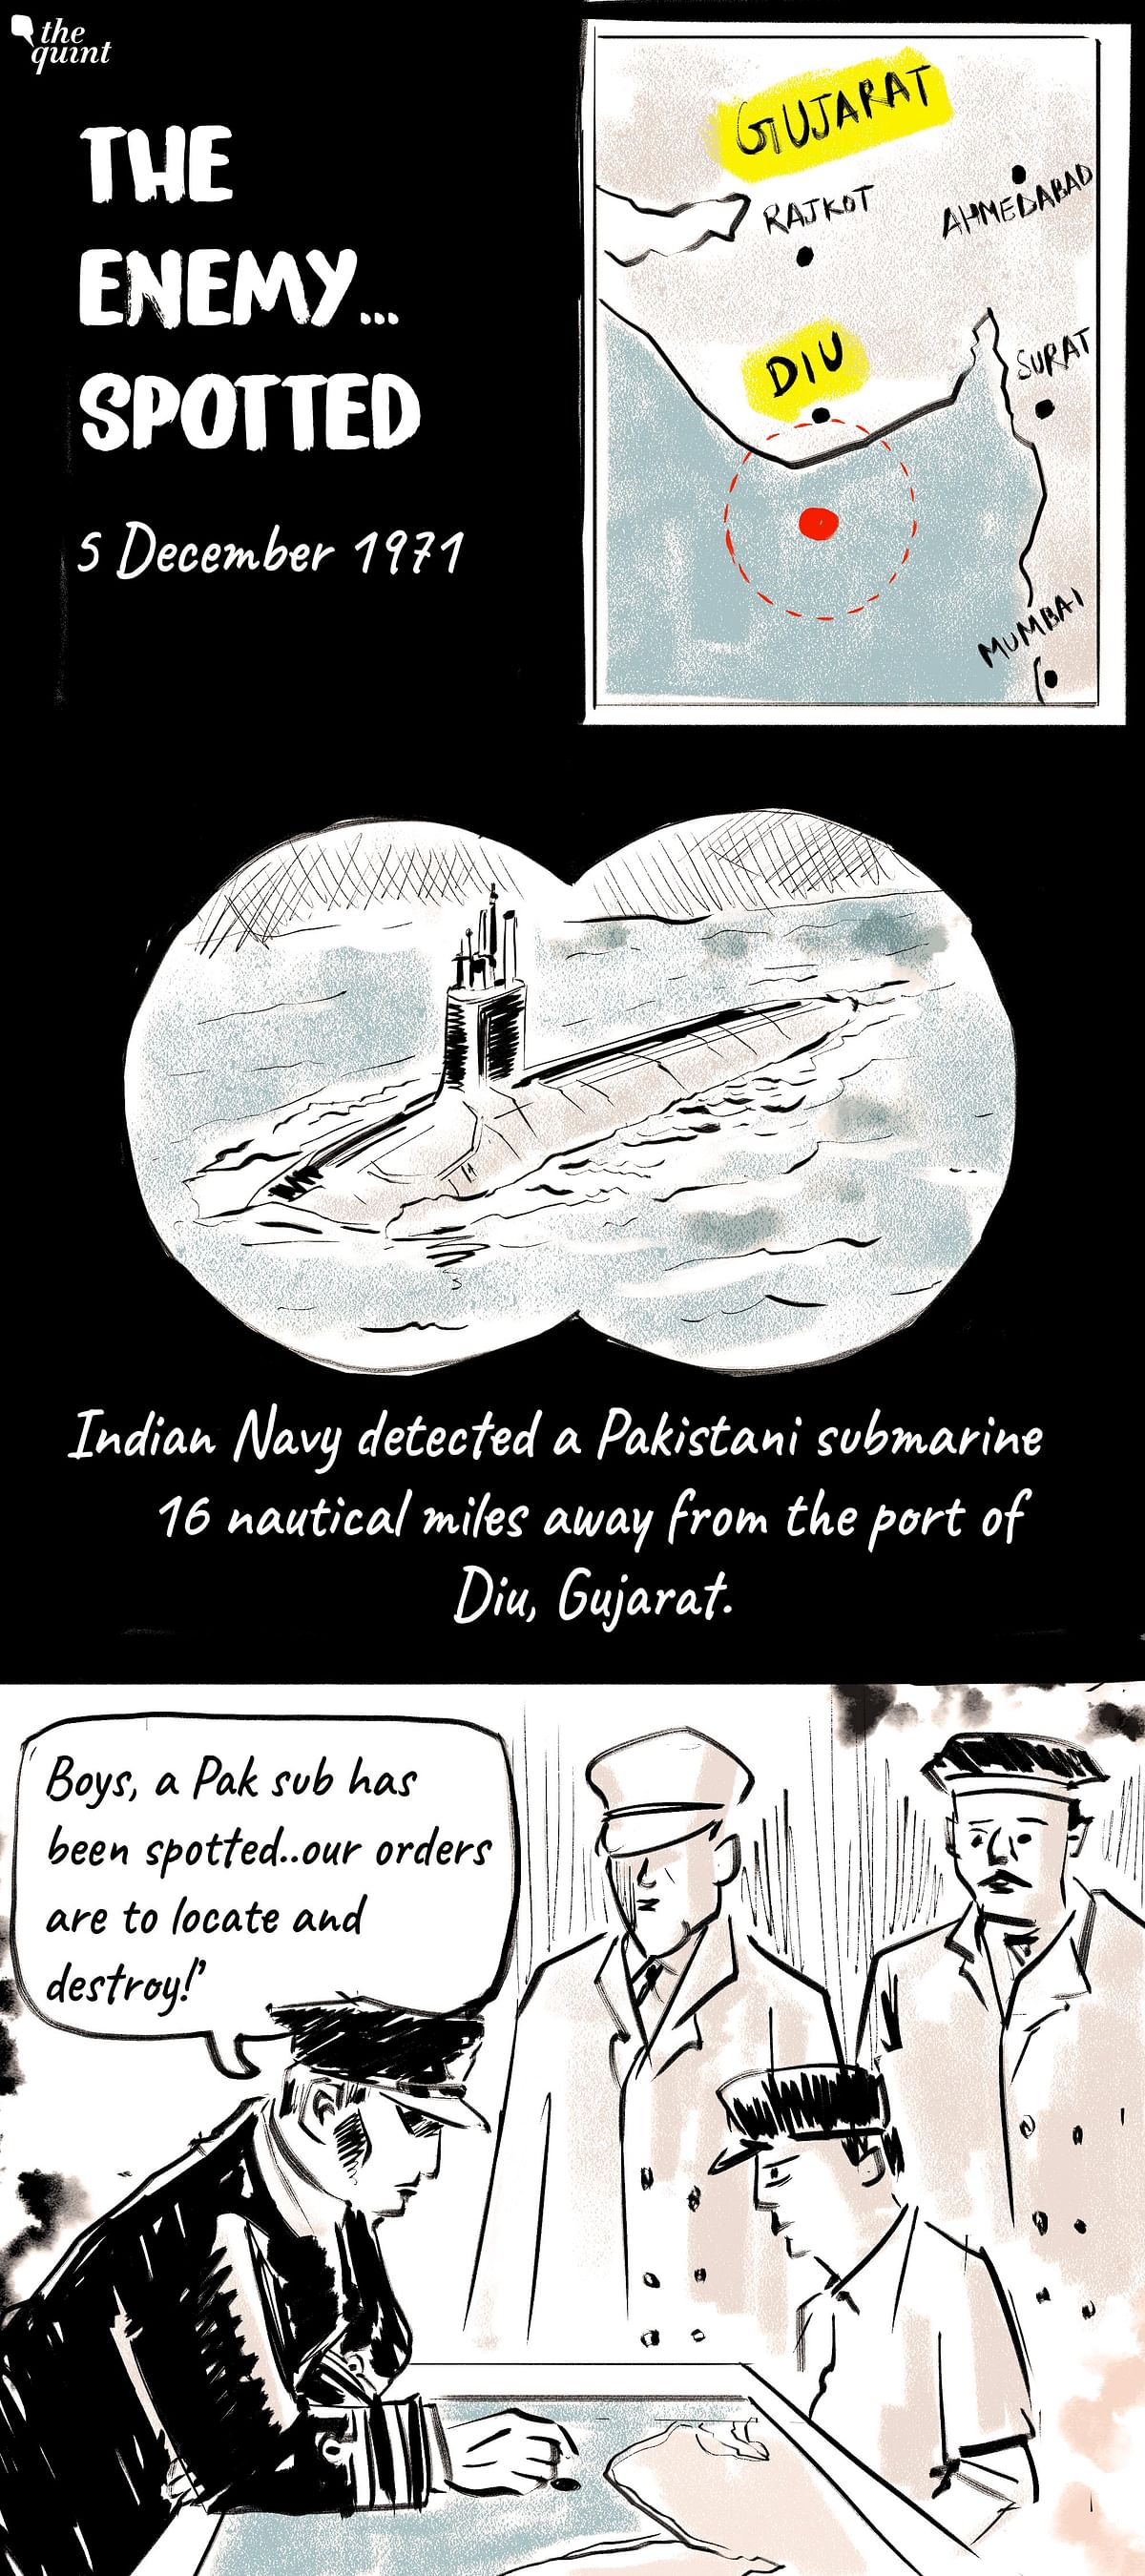 The Quint revisits the last journey of INS Khukri, the only Indian warship lost in a war with Pakistan in 1971.